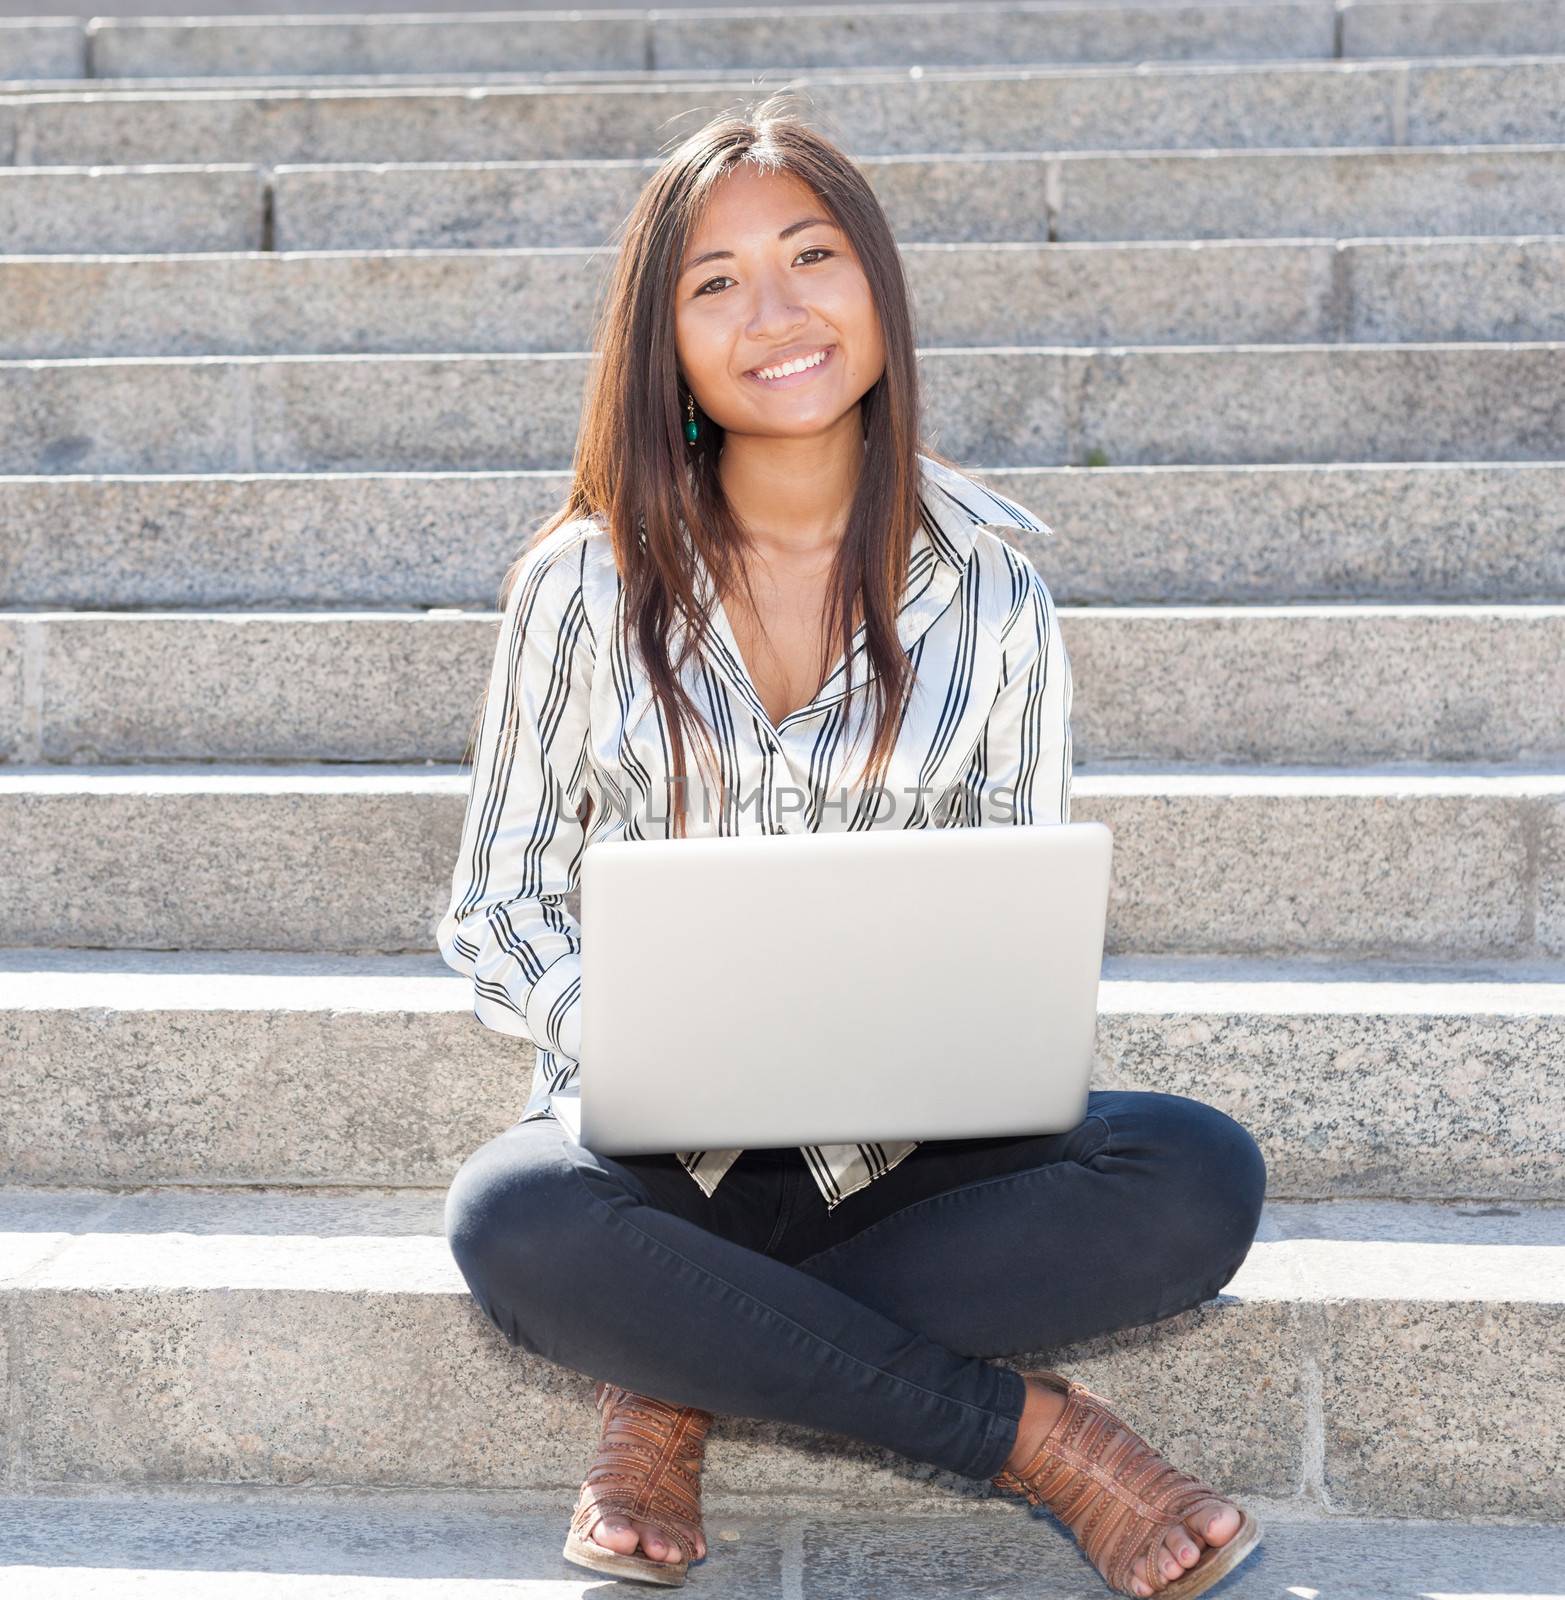 Beautiful asian girl sitting on stairs and using a laptop 